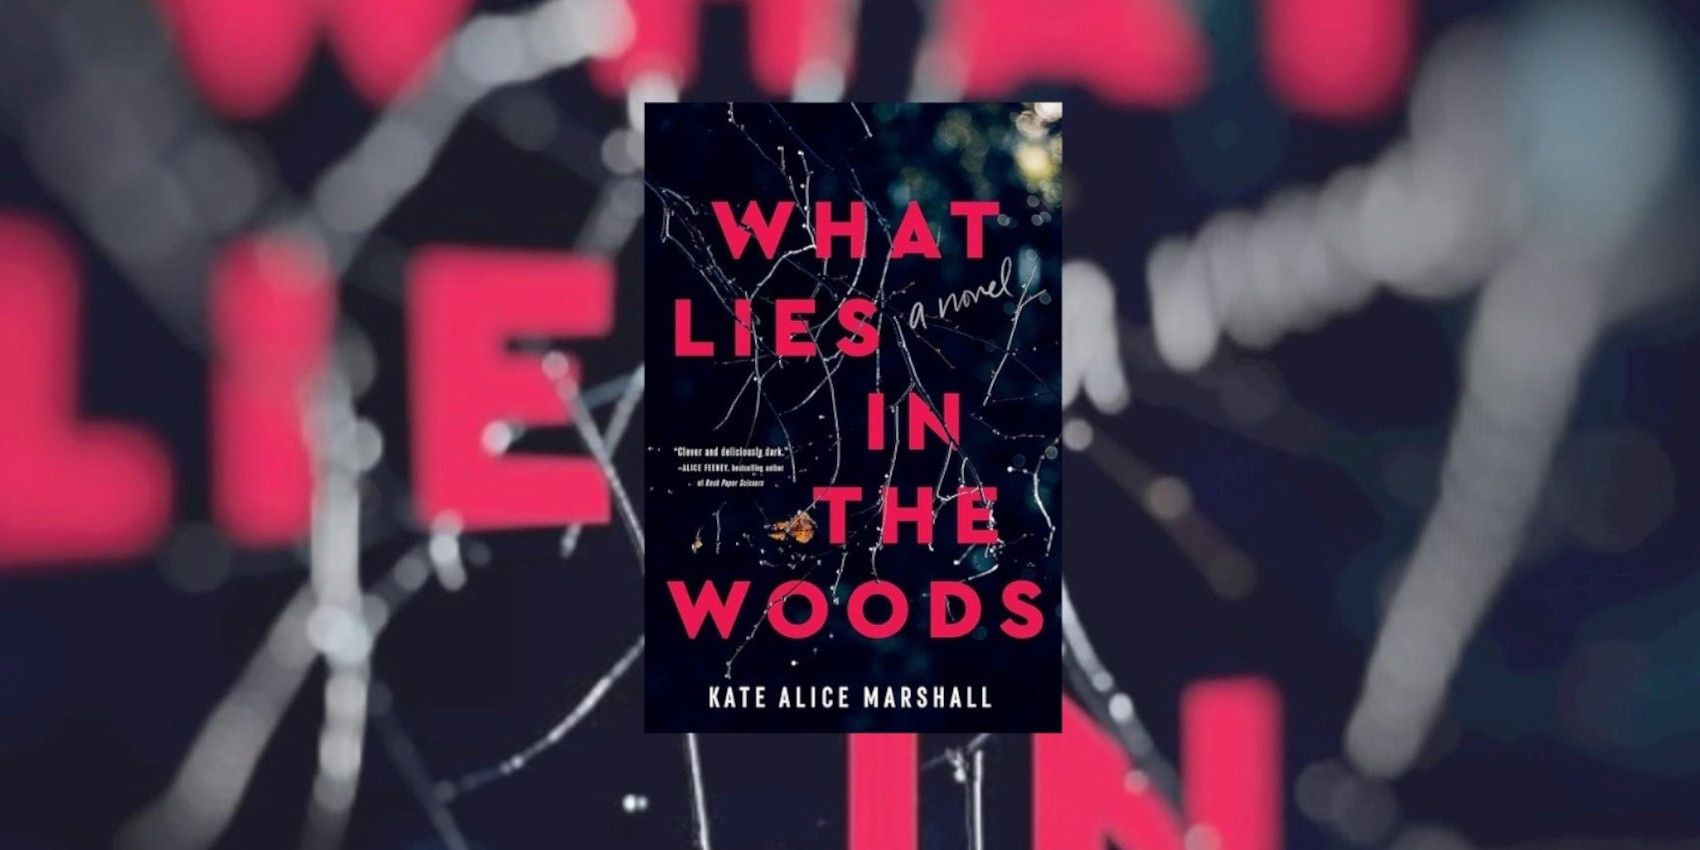 What Lies In The Woods by Kate Alice Marshall book cover over a close-up, blurred version of itself